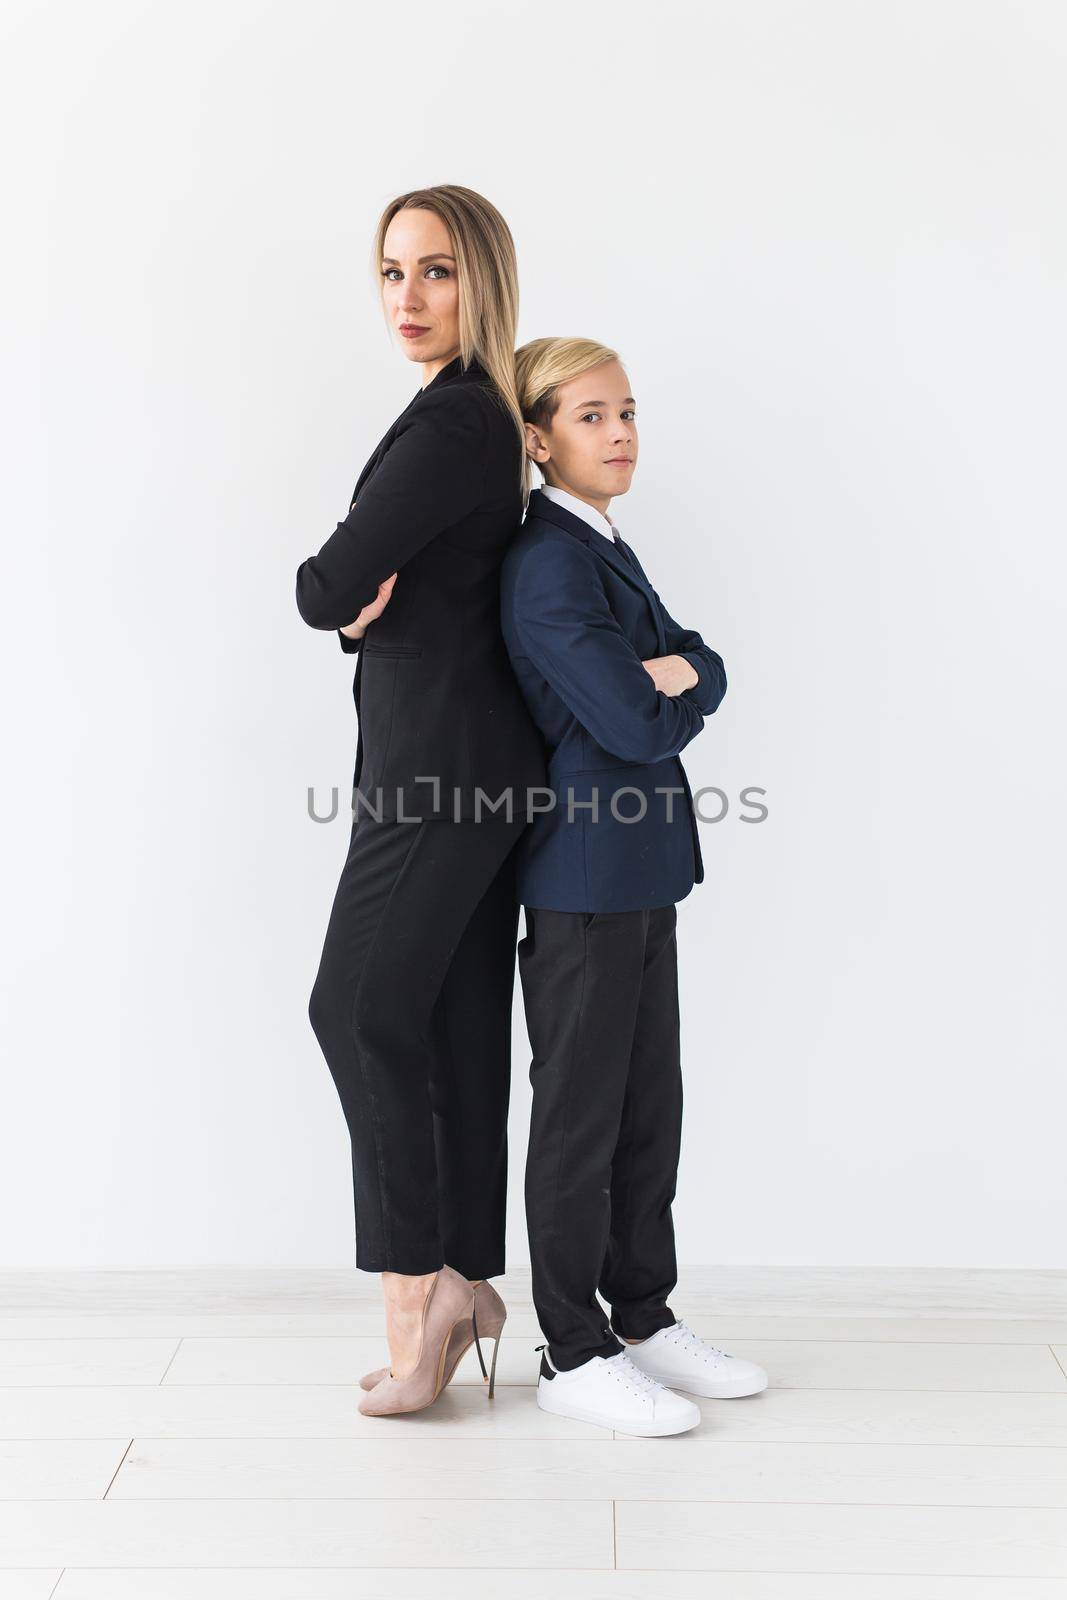 Teenager and single parent - Young mother and son standing together, back to back on white background. by Satura86